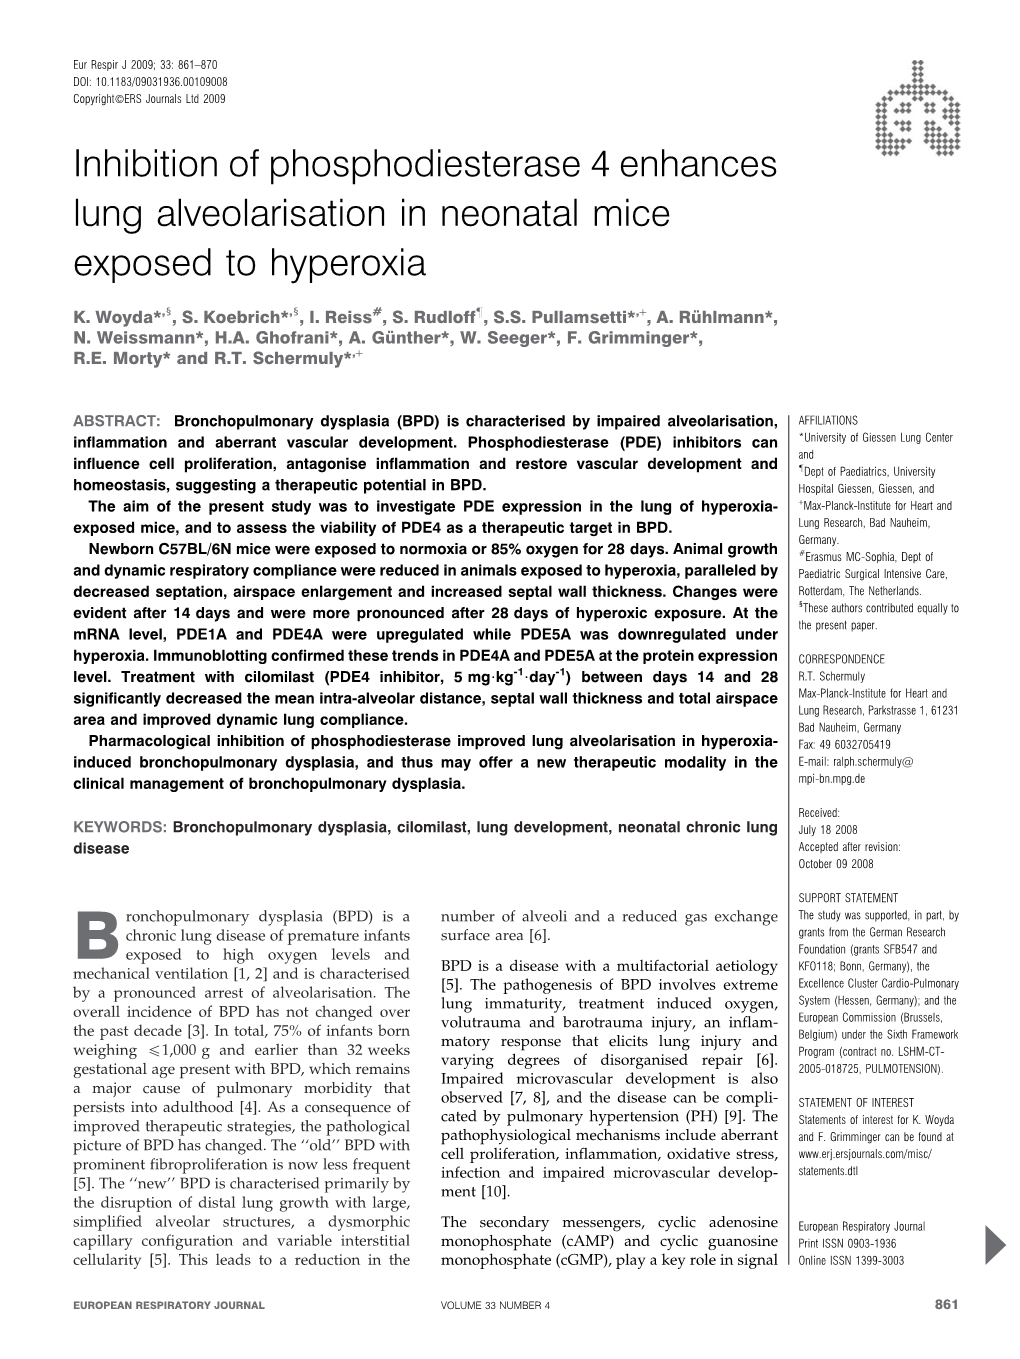 Inhibition of Phosphodiesterase 4 Enhances Lung Alveolarisation in Neonatal Mice Exposed to Hyperoxia